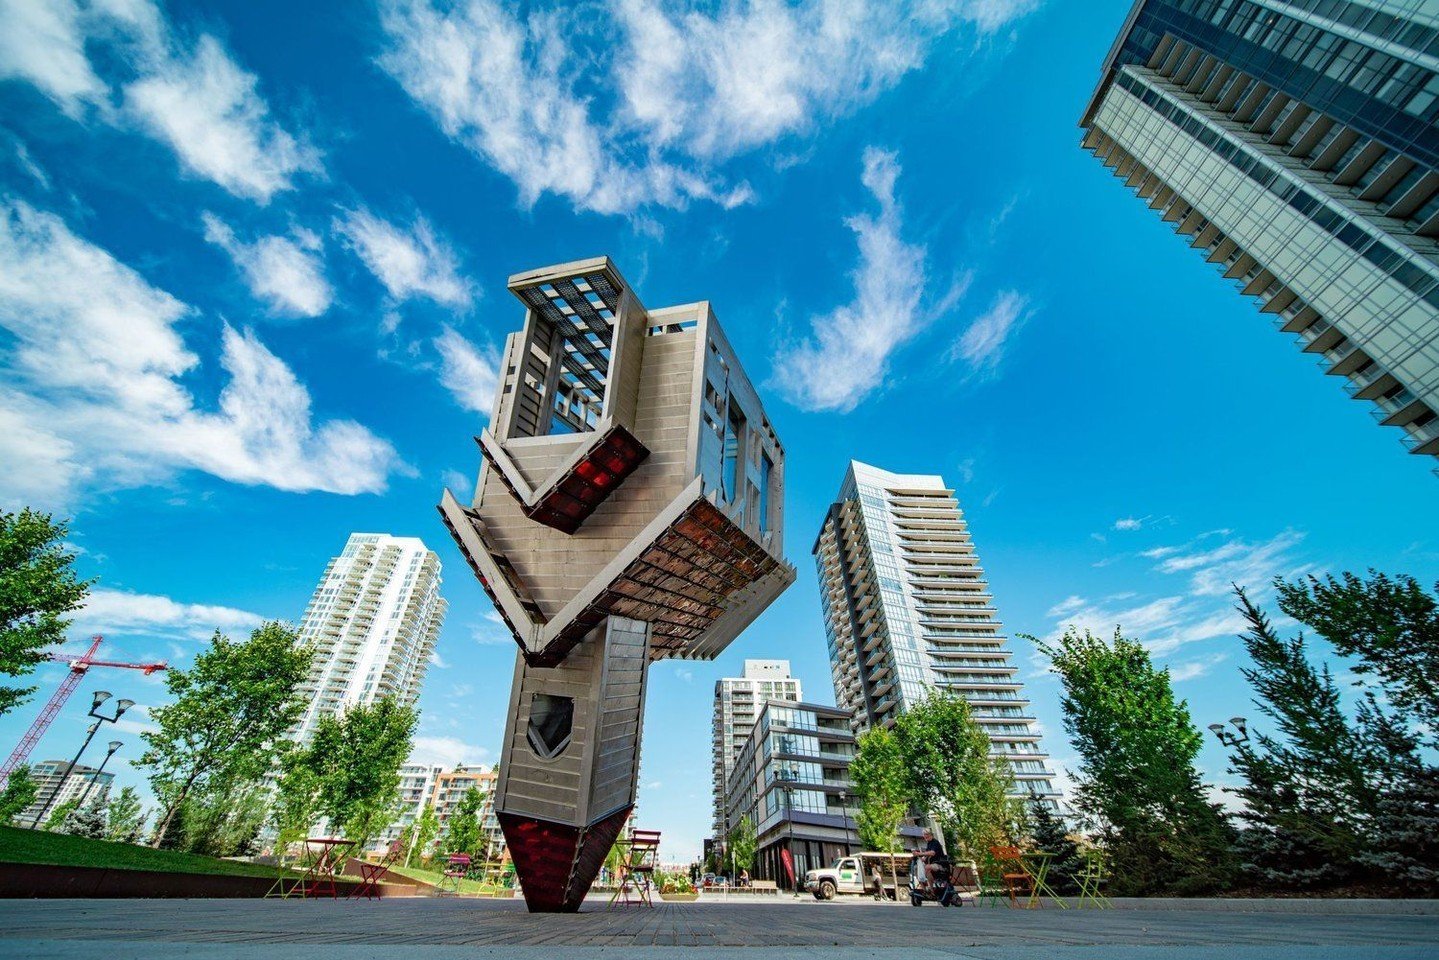 Explore Calgary this weekend by joining Jane's Walks, an annual event inspired by urbanist Jane Jacobs. Urbanists play a crucial role in shaping the architectural landscape of a city. They focus on understanding the social, cultural, and economic dyn